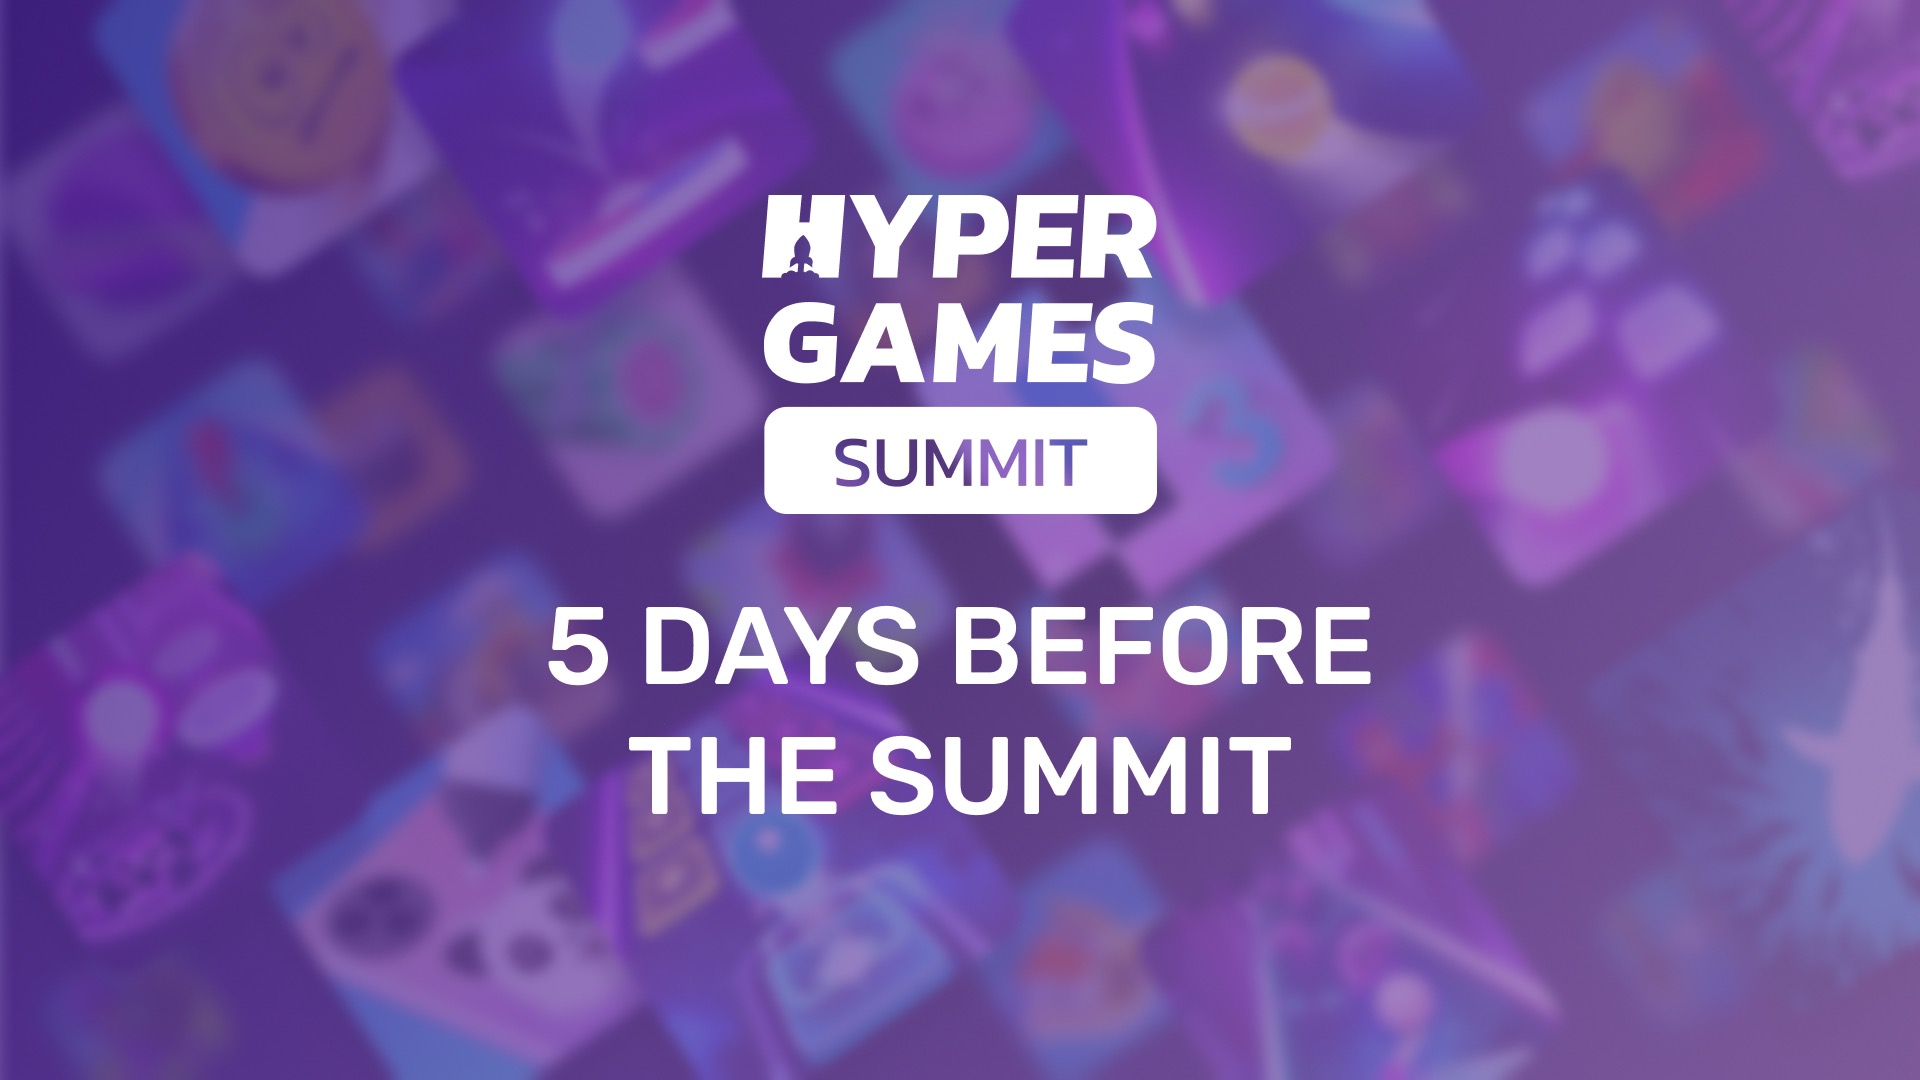 Five days before the Hyper Games Summit